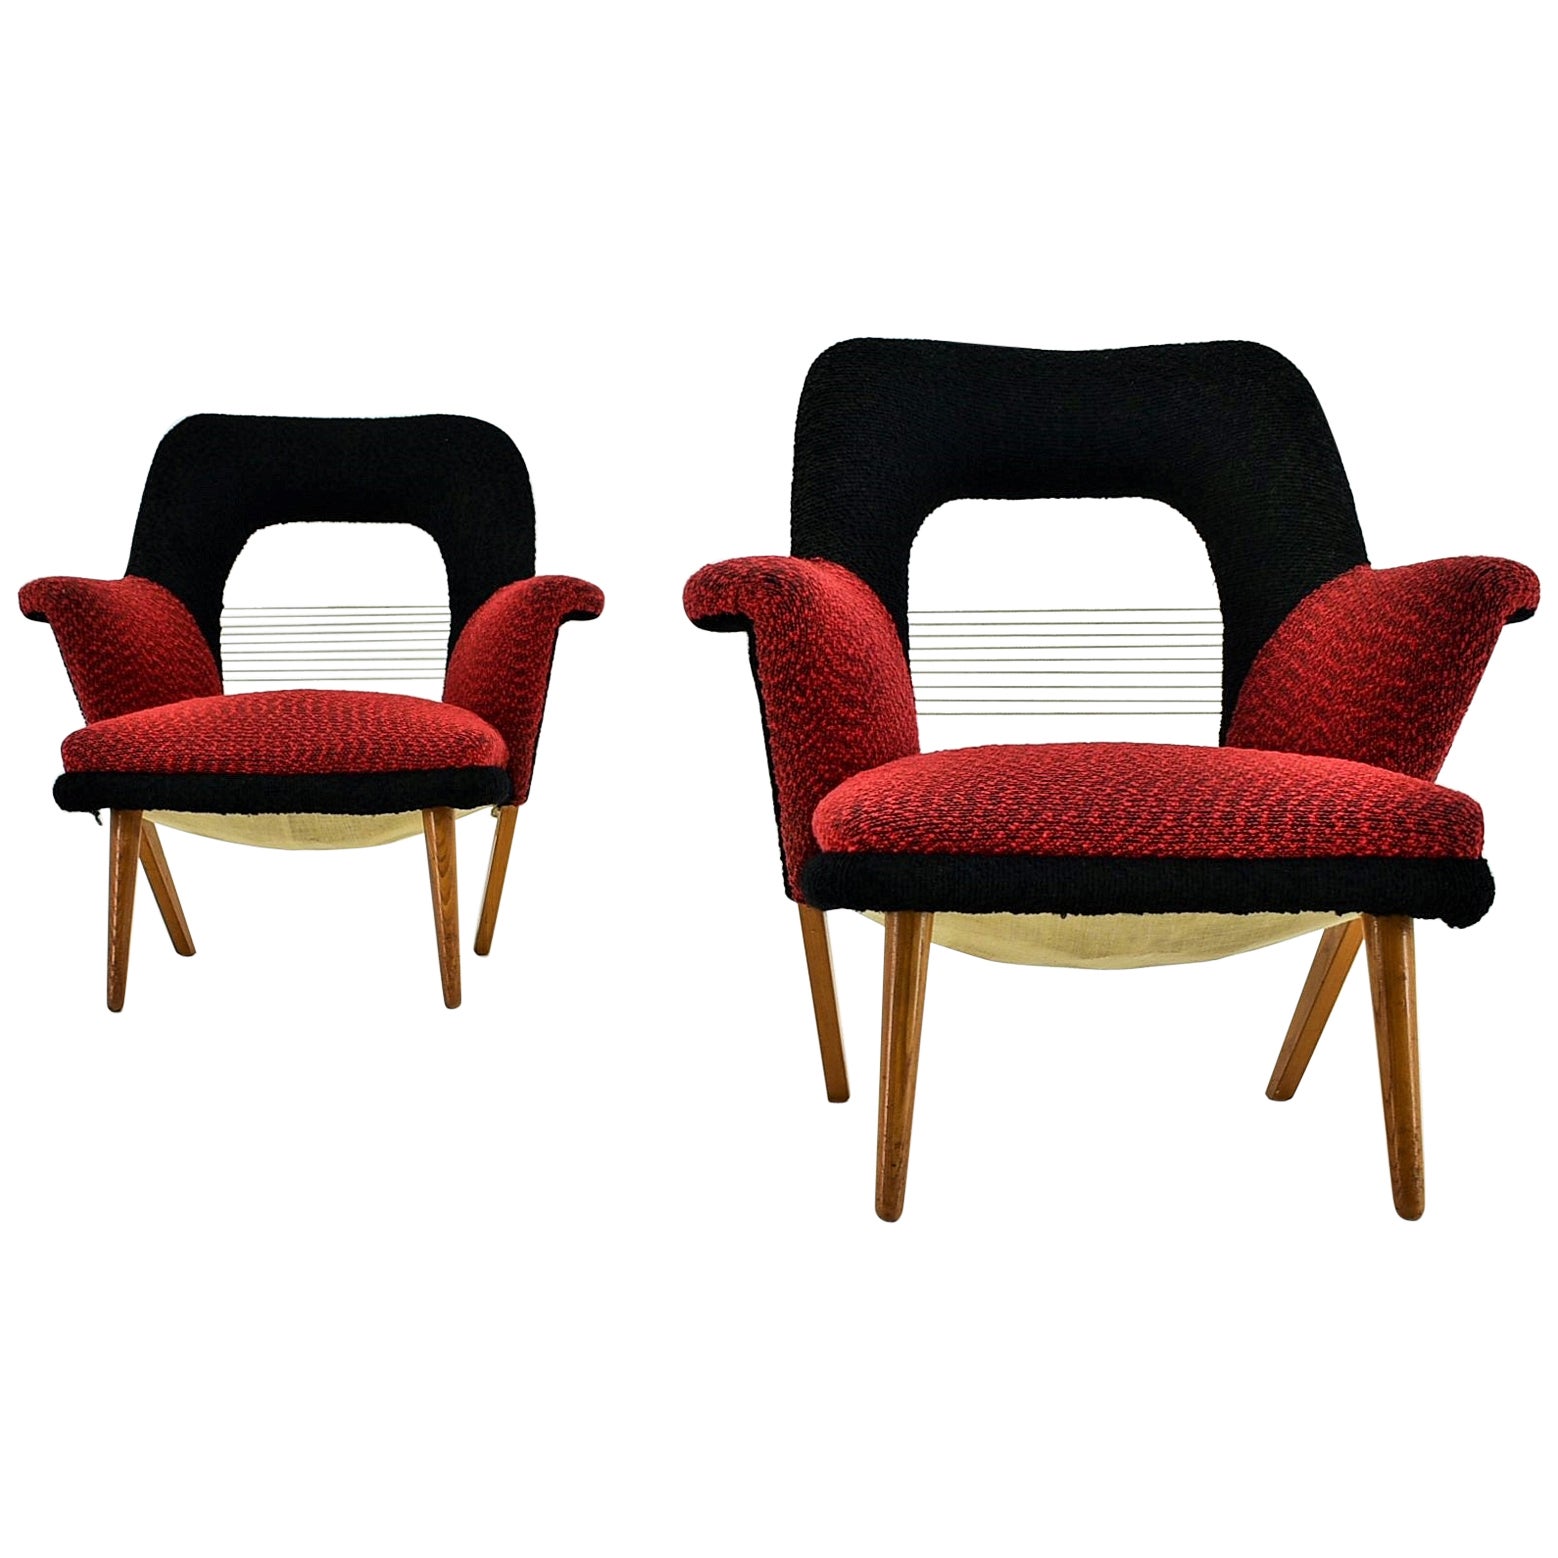 Midcentury Armchairs Designed by Miroslav Navrátil, 1969s For Sale